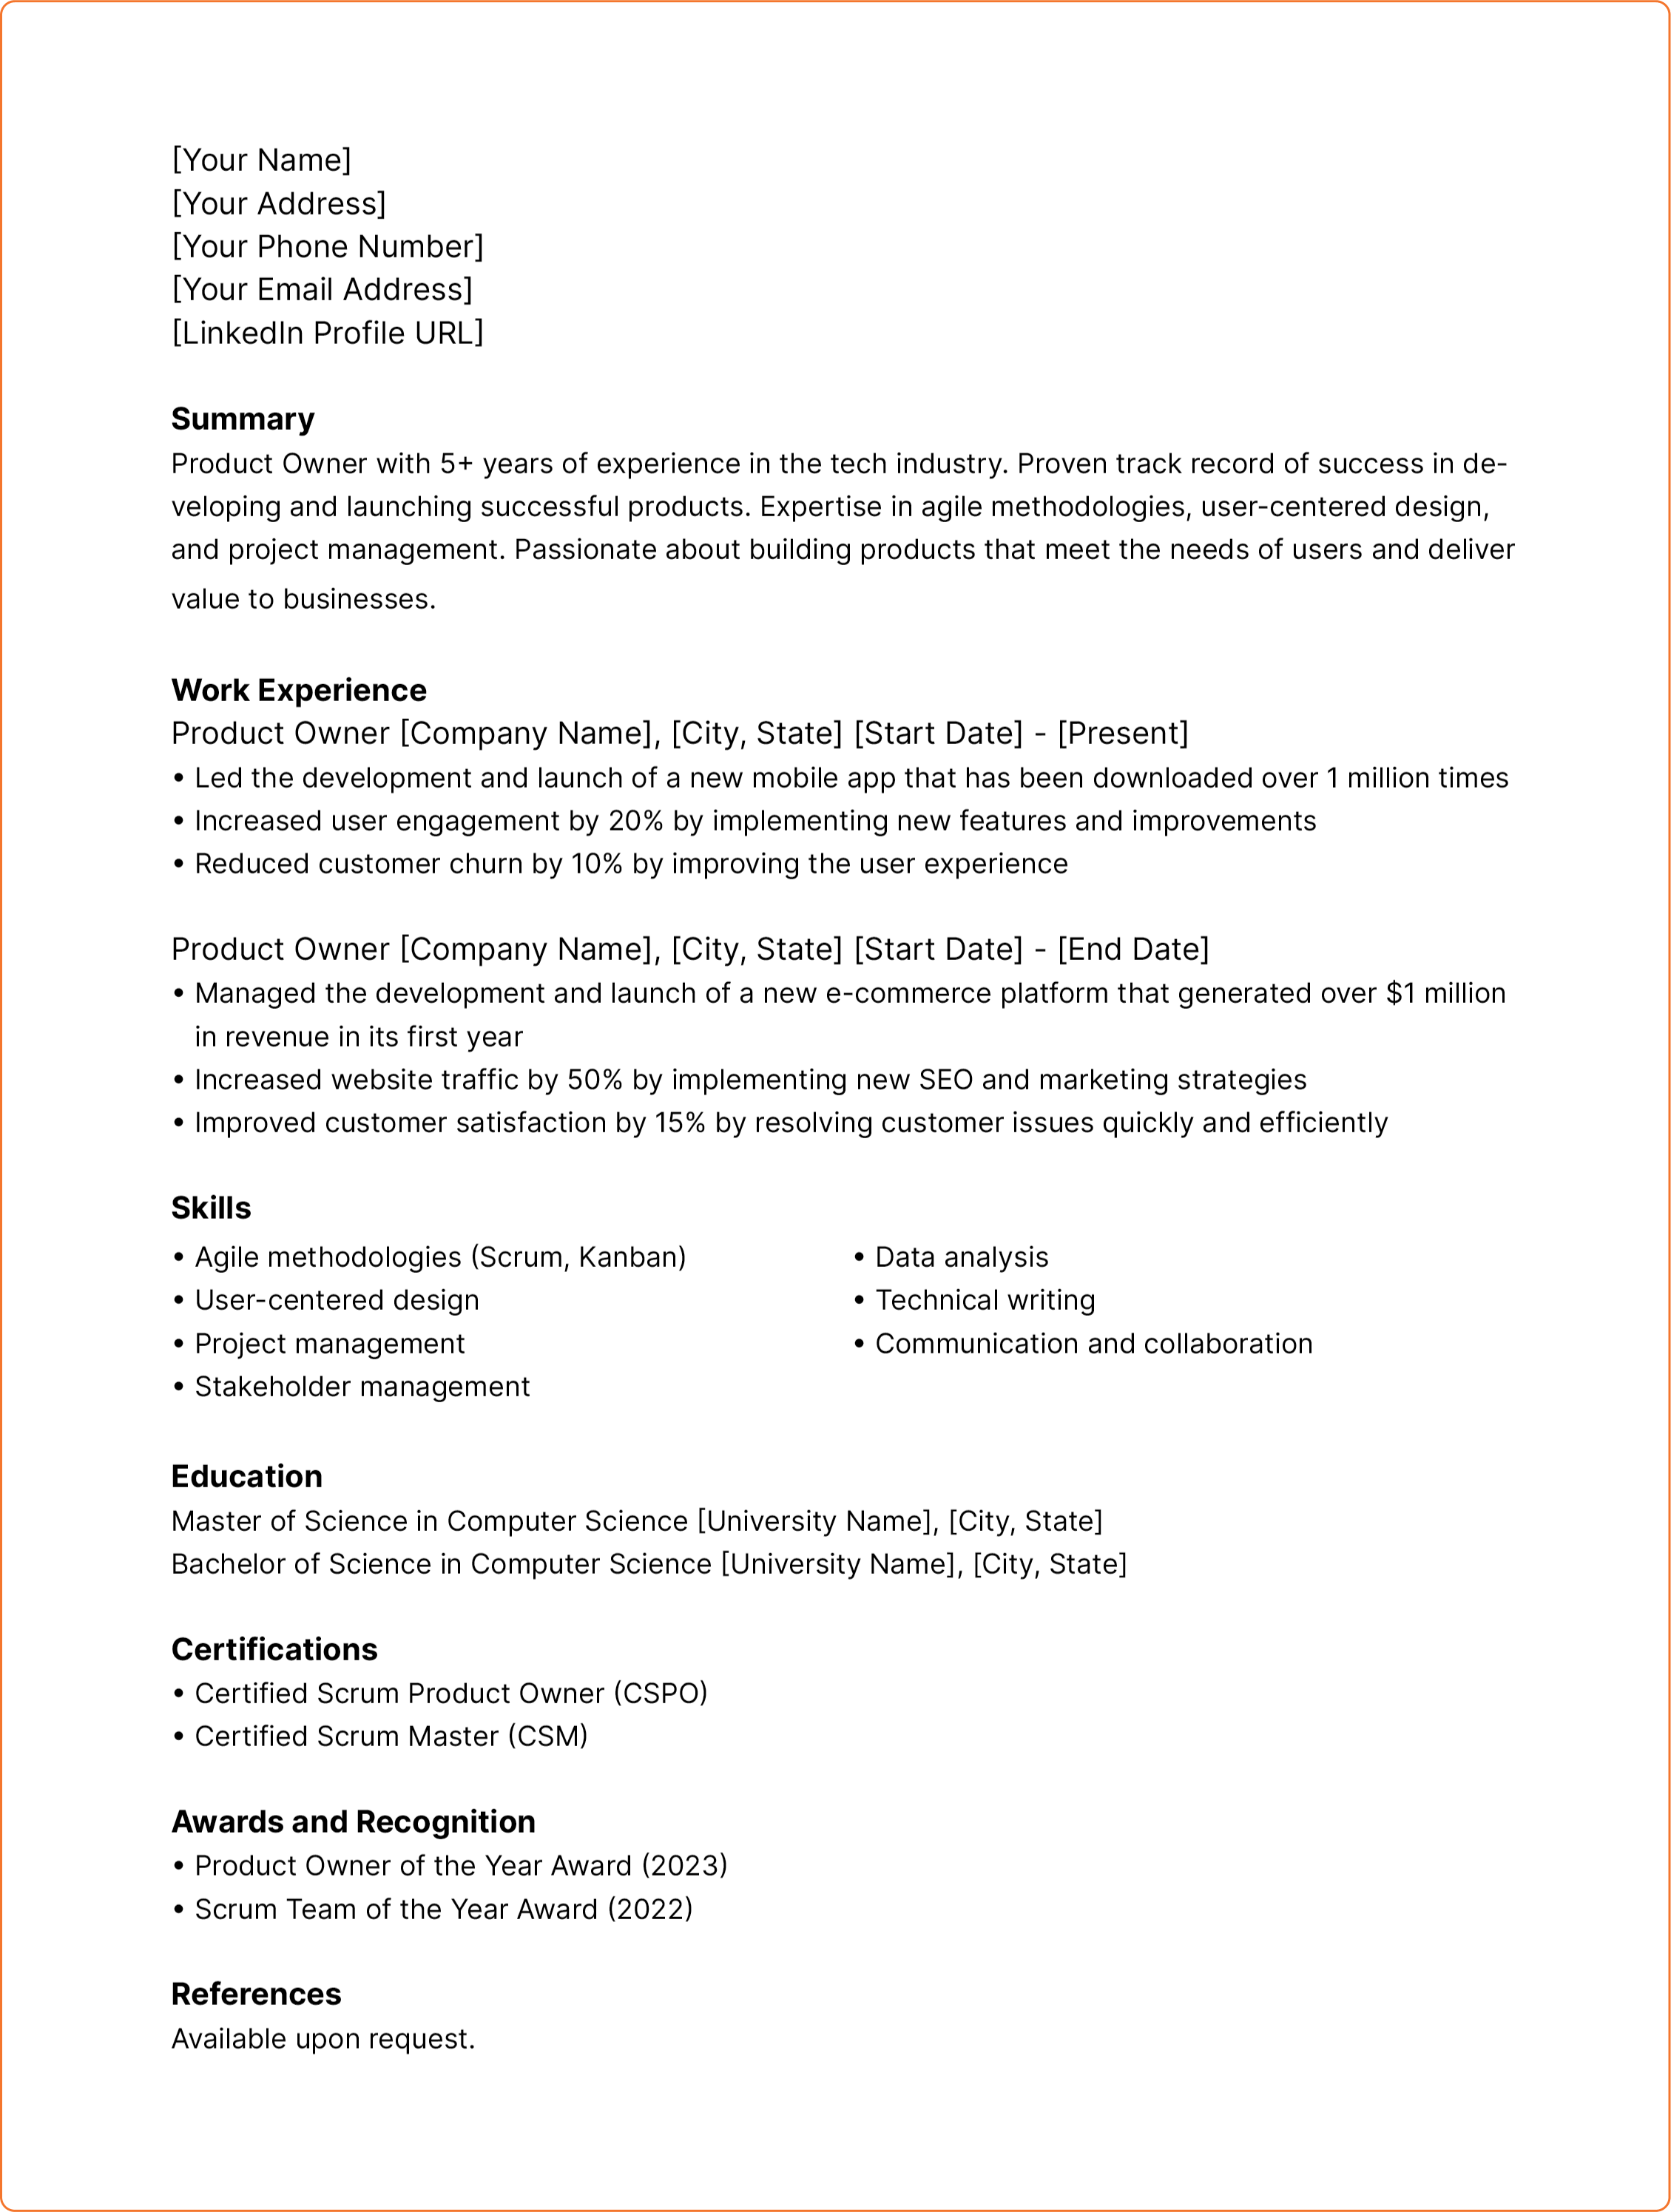 A sample resume template for a product owner